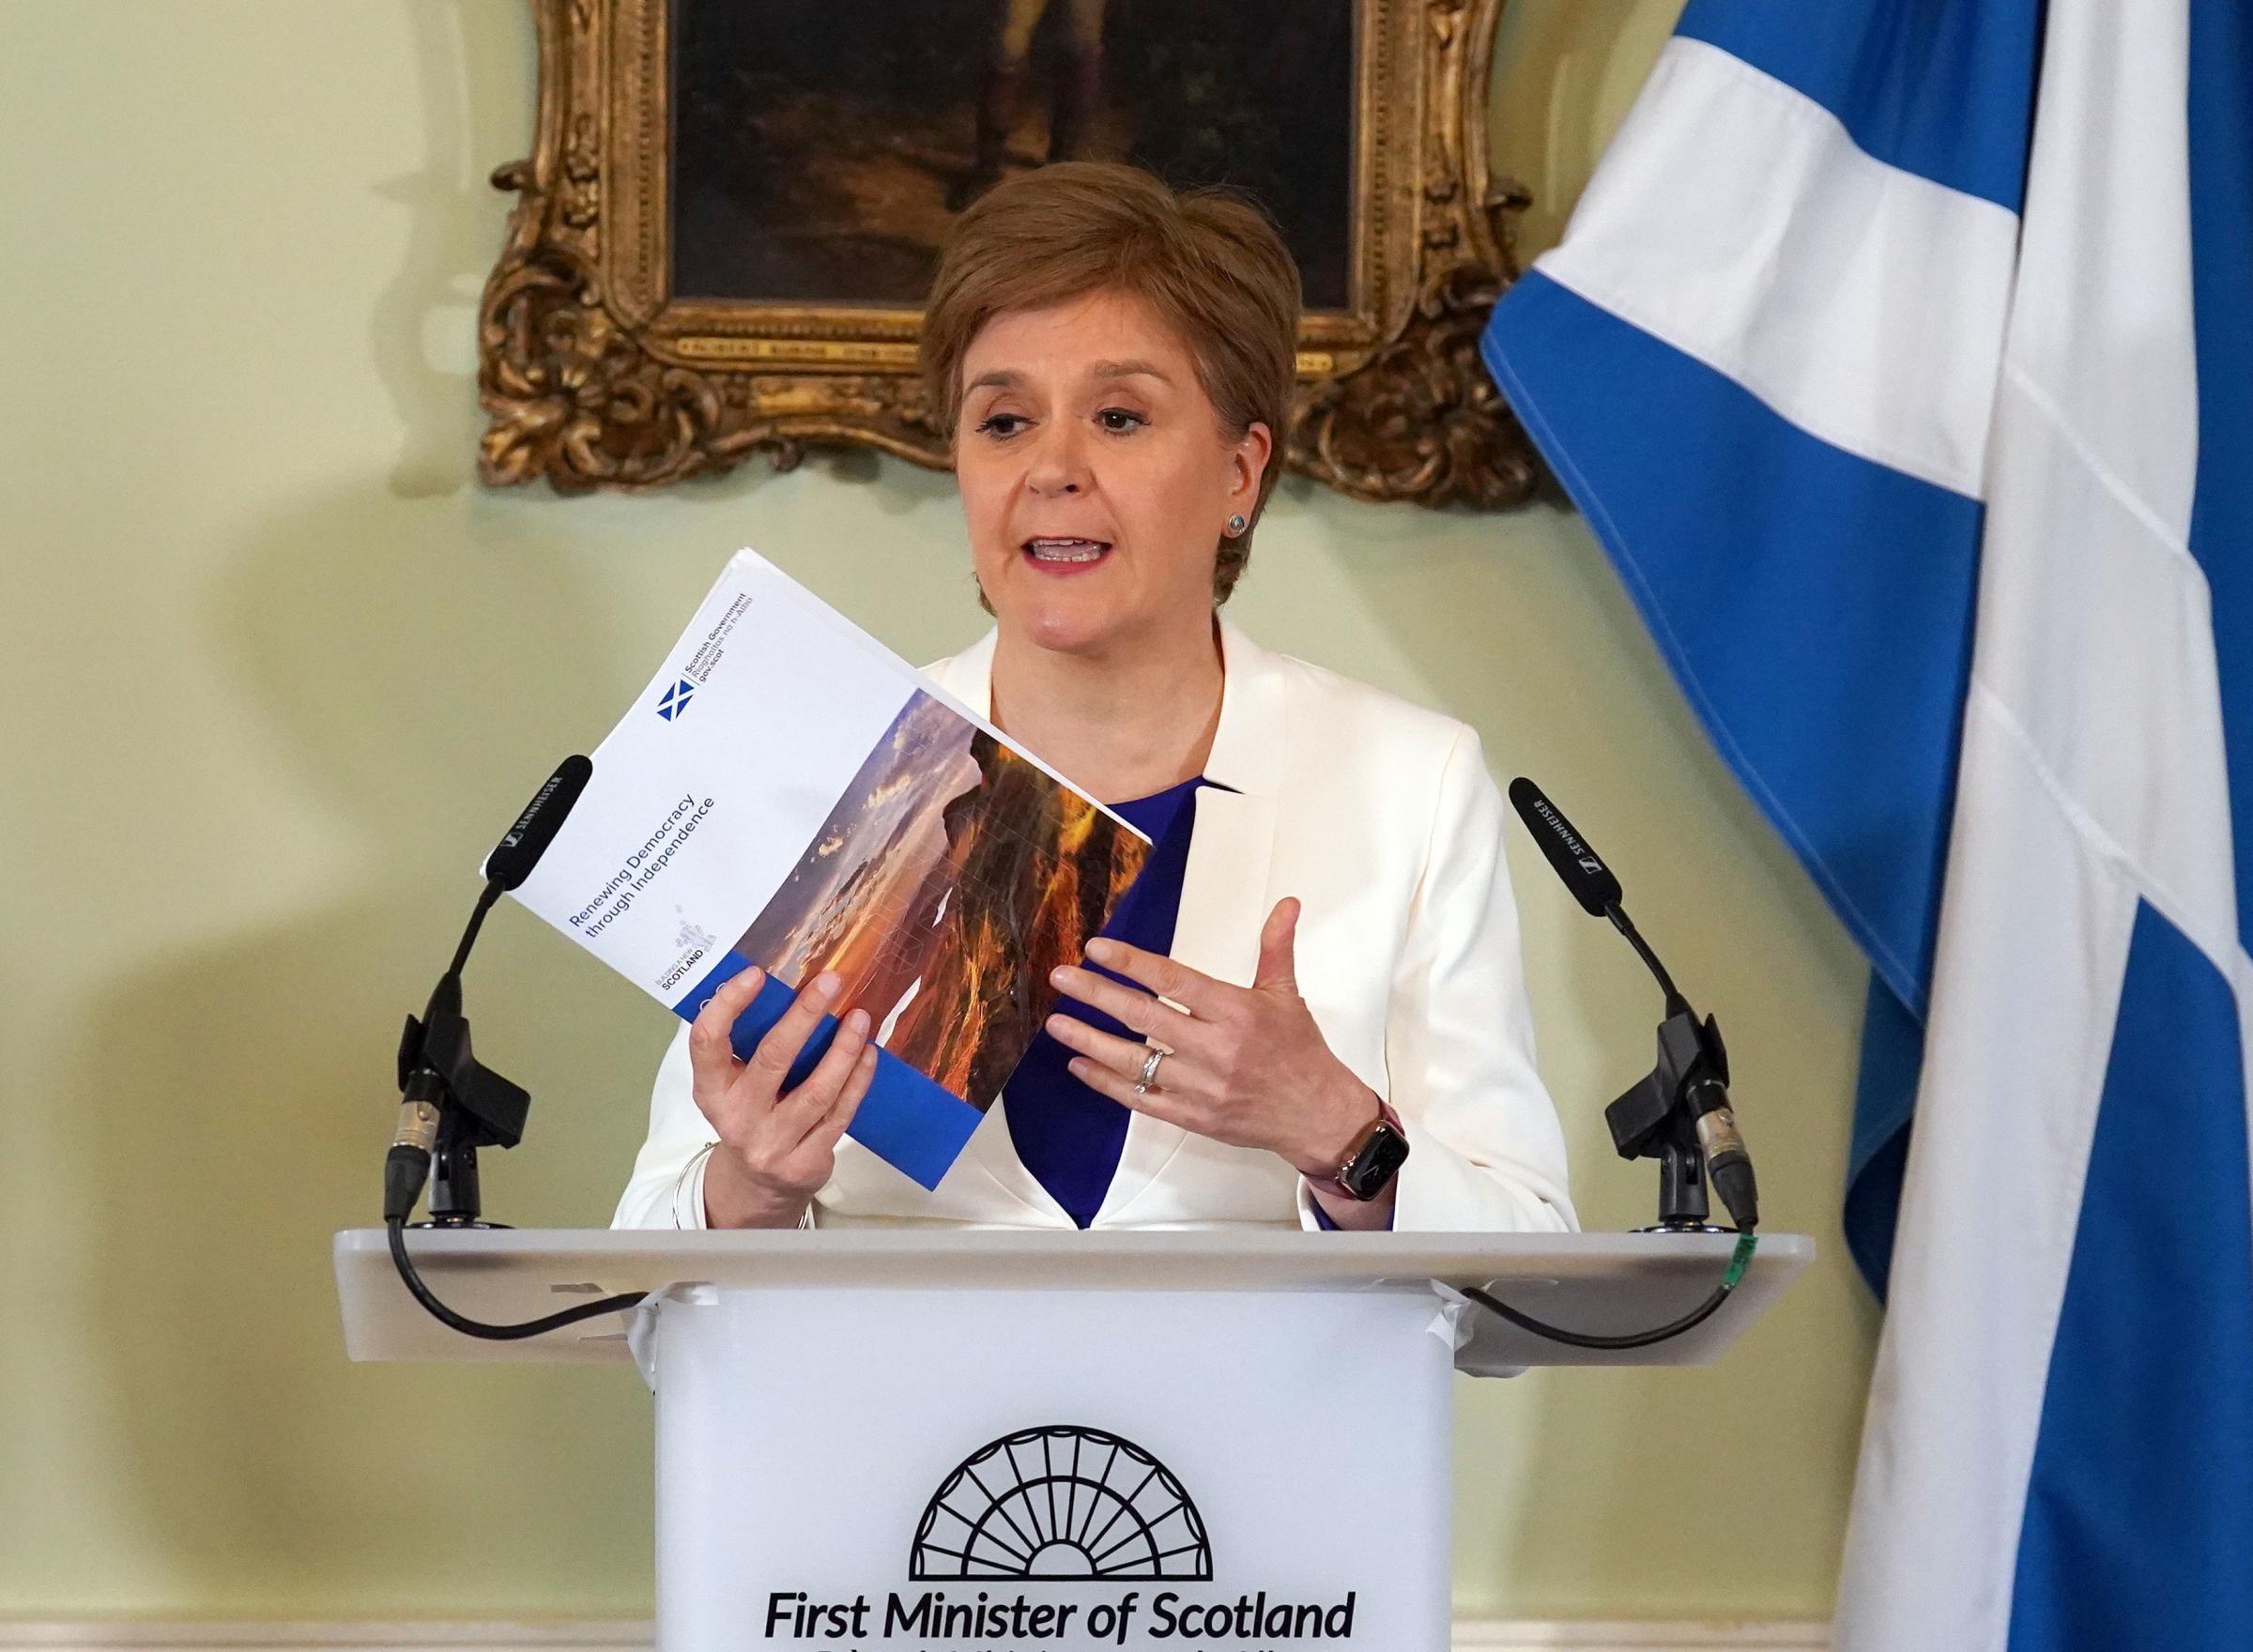 Nicola Sturgeon at the launch of the Scottish Governments Renewing Democracy through Independence document